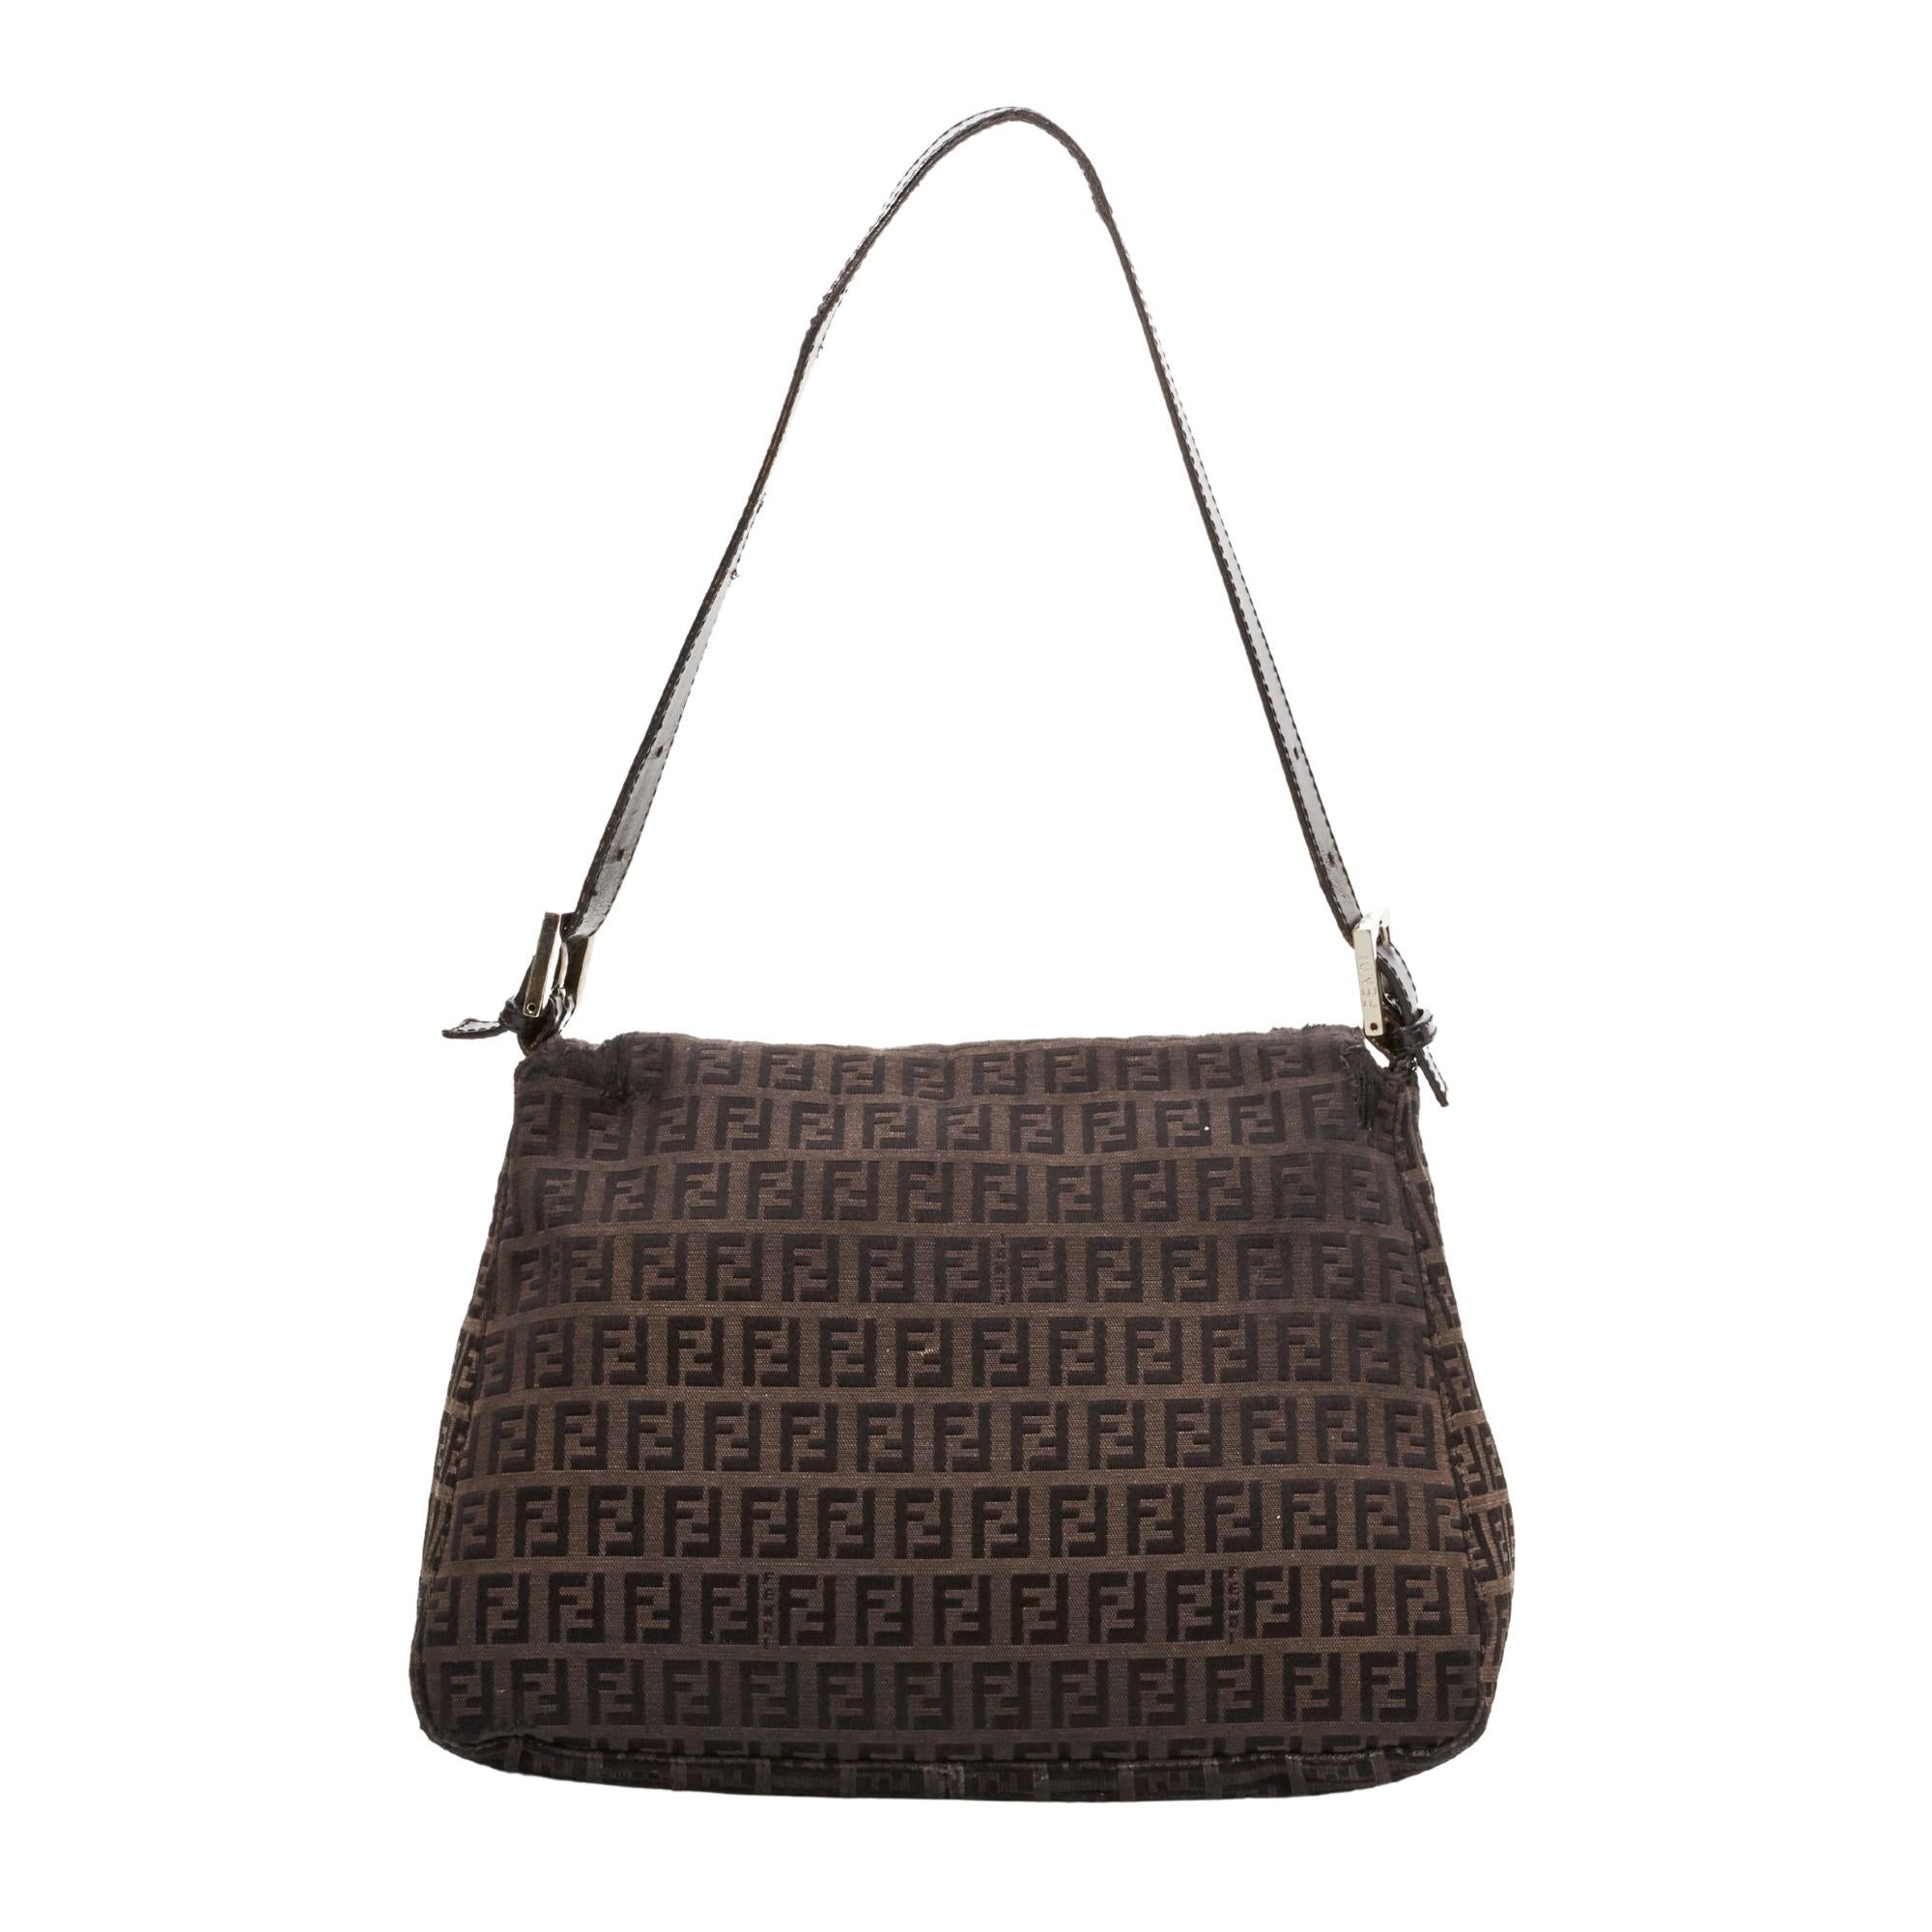 This Mama baguette is made with dark brown canvas with Fendi Zuccino embossing throughout. The bag features an adjustable looping leather strap, sliver buckle links for the top strap and a front leather strap with a sliver FF logo. This flap opens